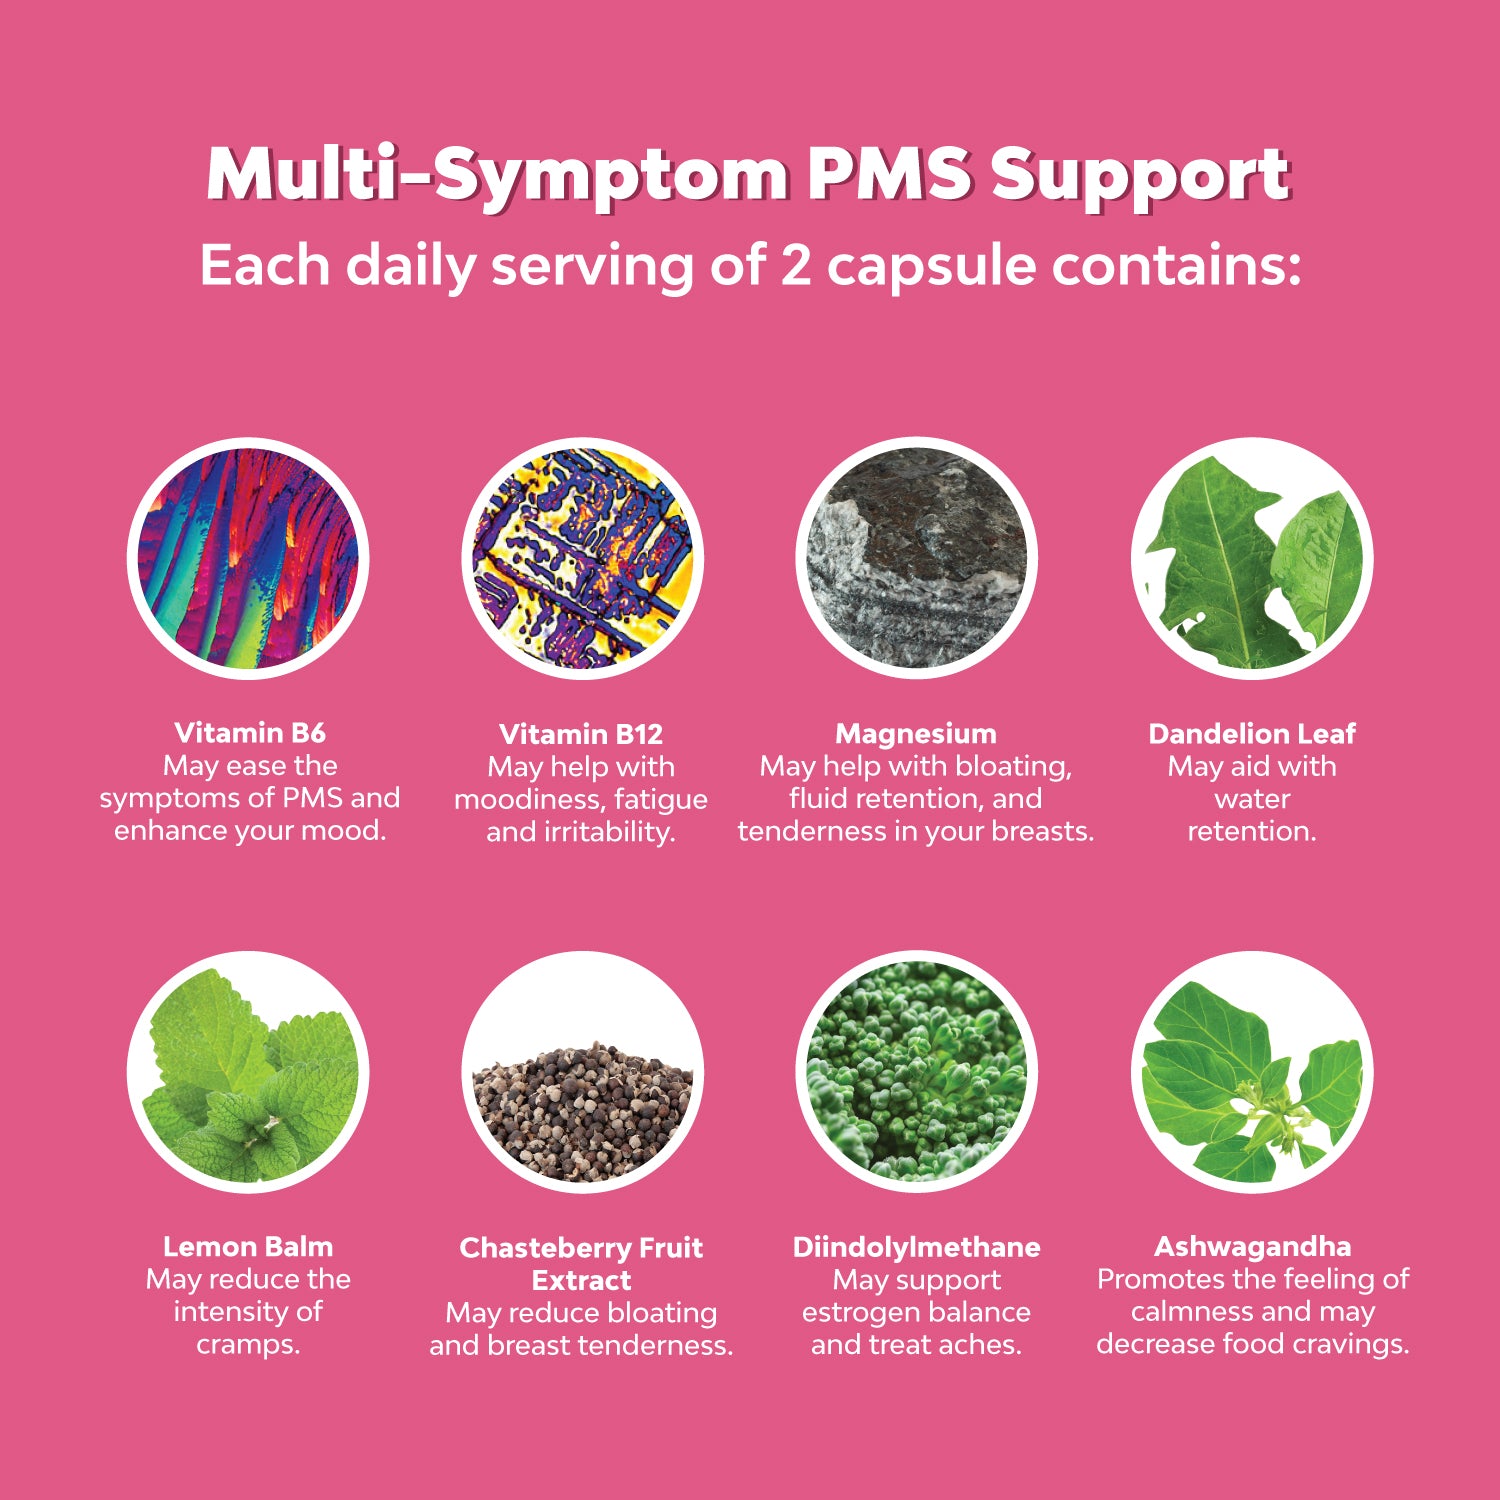 PMS Support - 60 Capsules - Nature's Craft